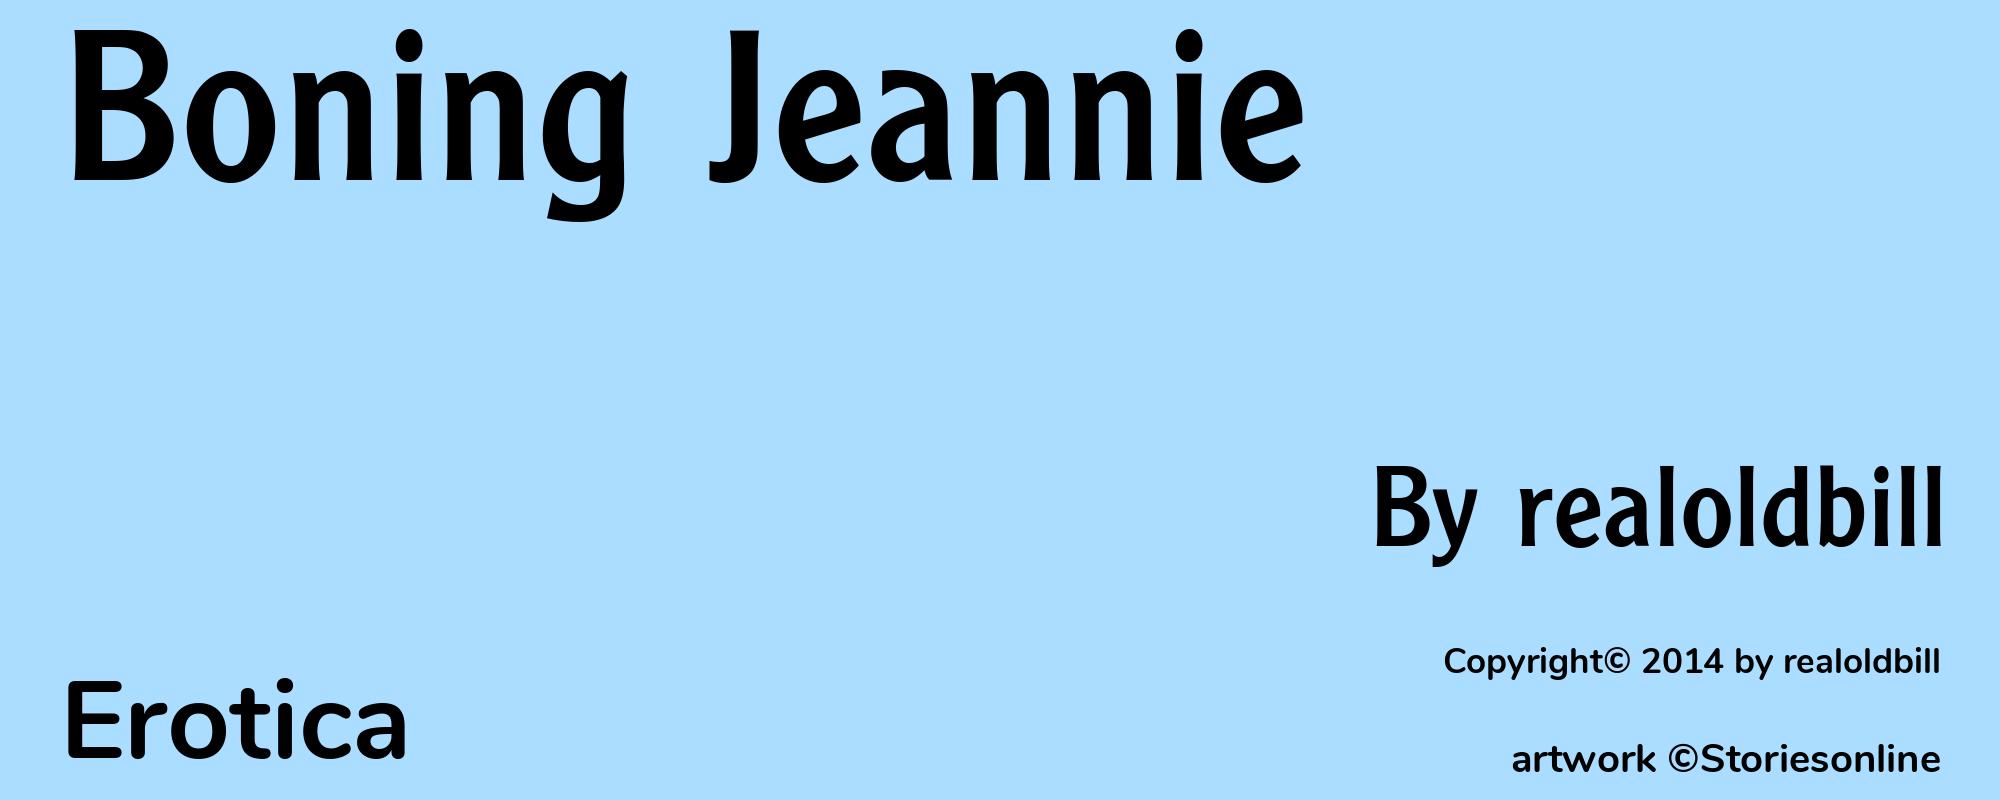 Boning Jeannie - Cover